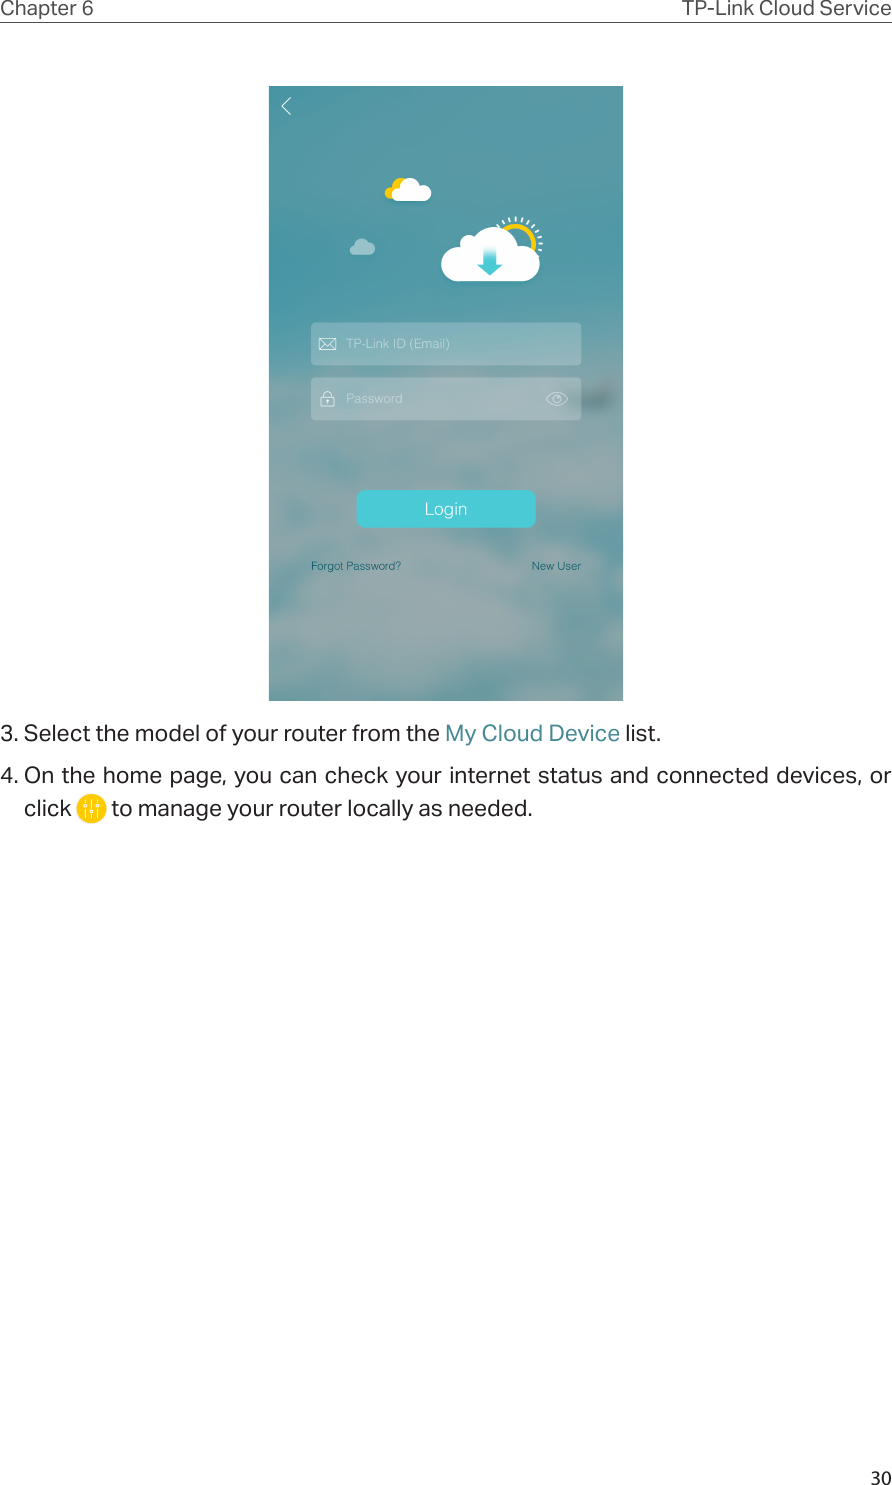 30Chapter 6 TP-Link Cloud Service3. Select the model of your router from the My Cloud Device list.4. On the home page, you can check your internet status and connected devices, or click   to manage your router locally as needed.